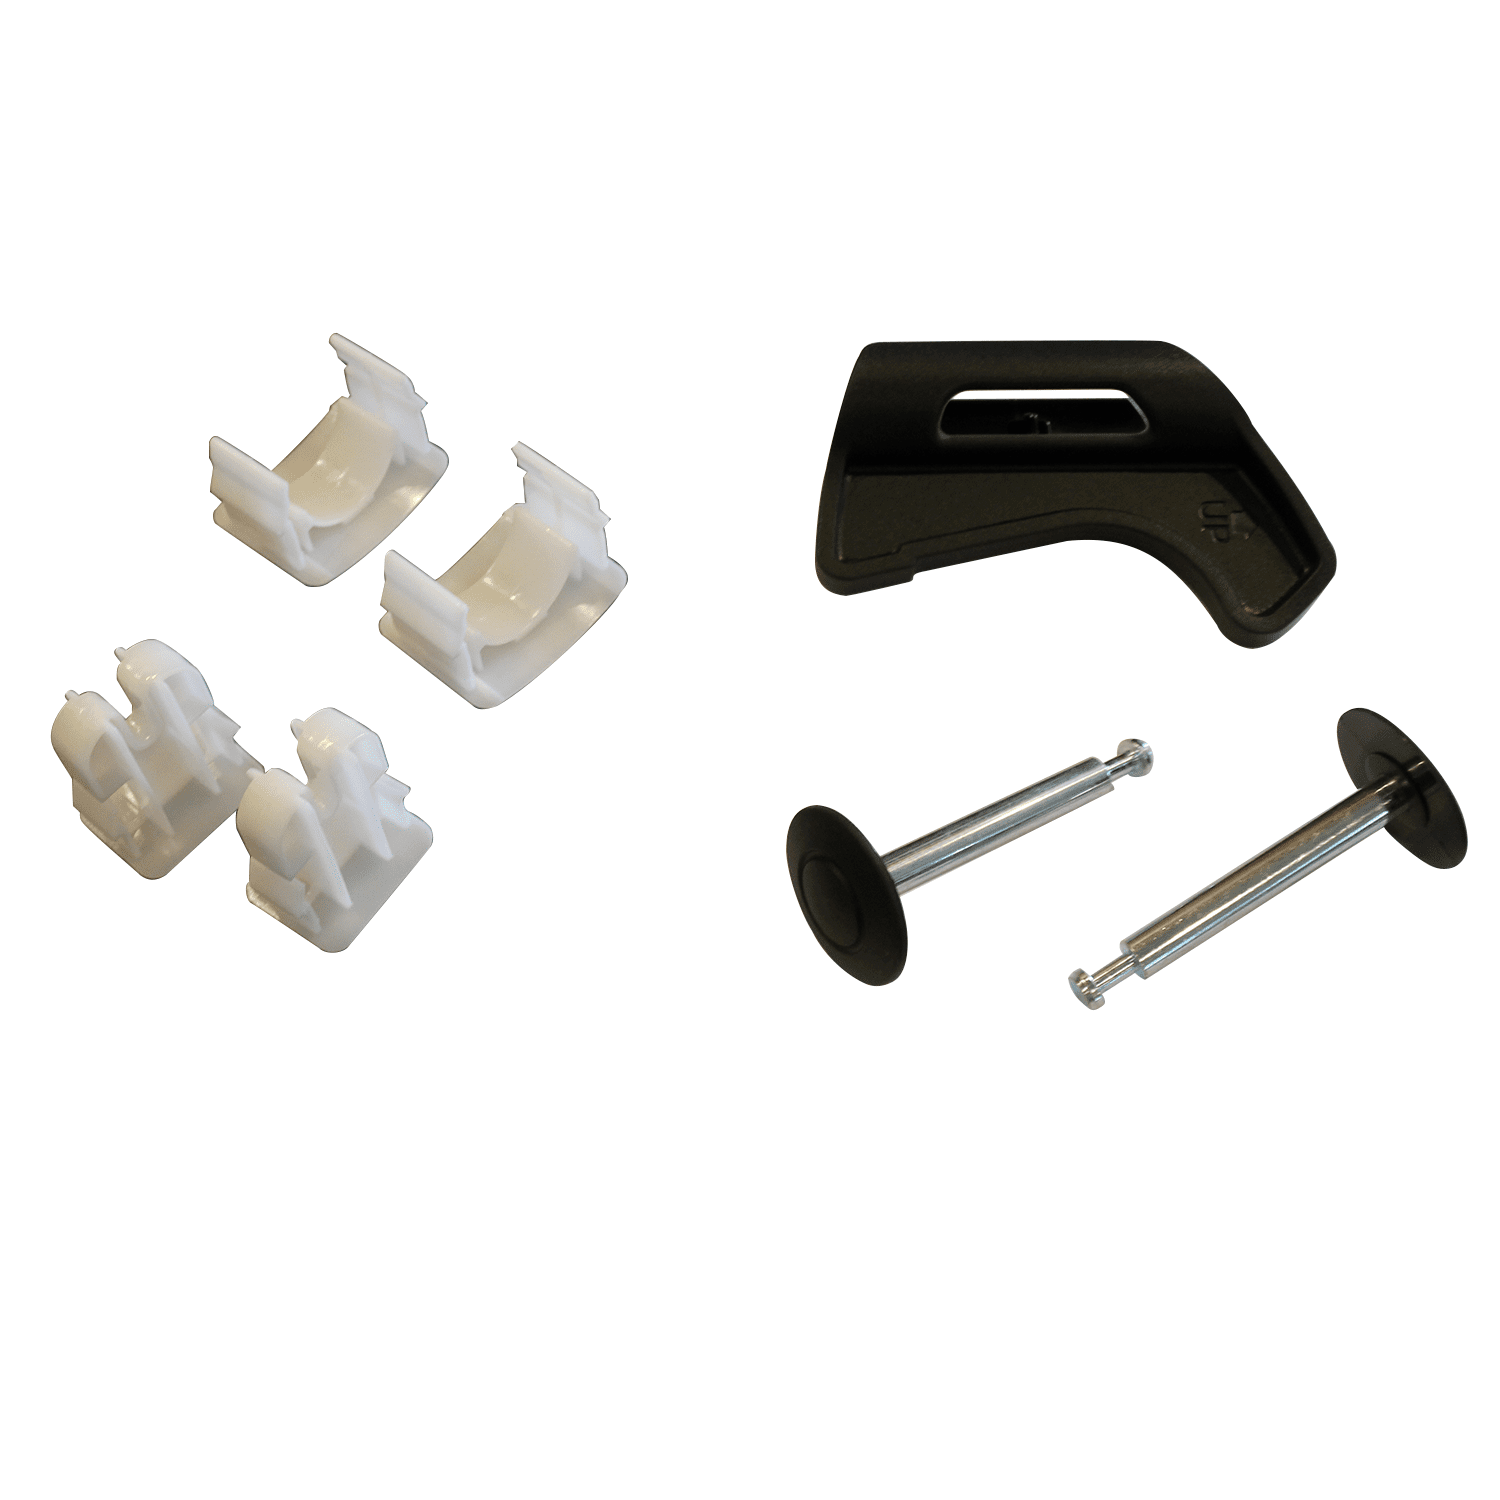 Zodiac VX50 / VX55 Caddy Accessories - R0564900 | Boost Your Pool Cleaning Efficiency!